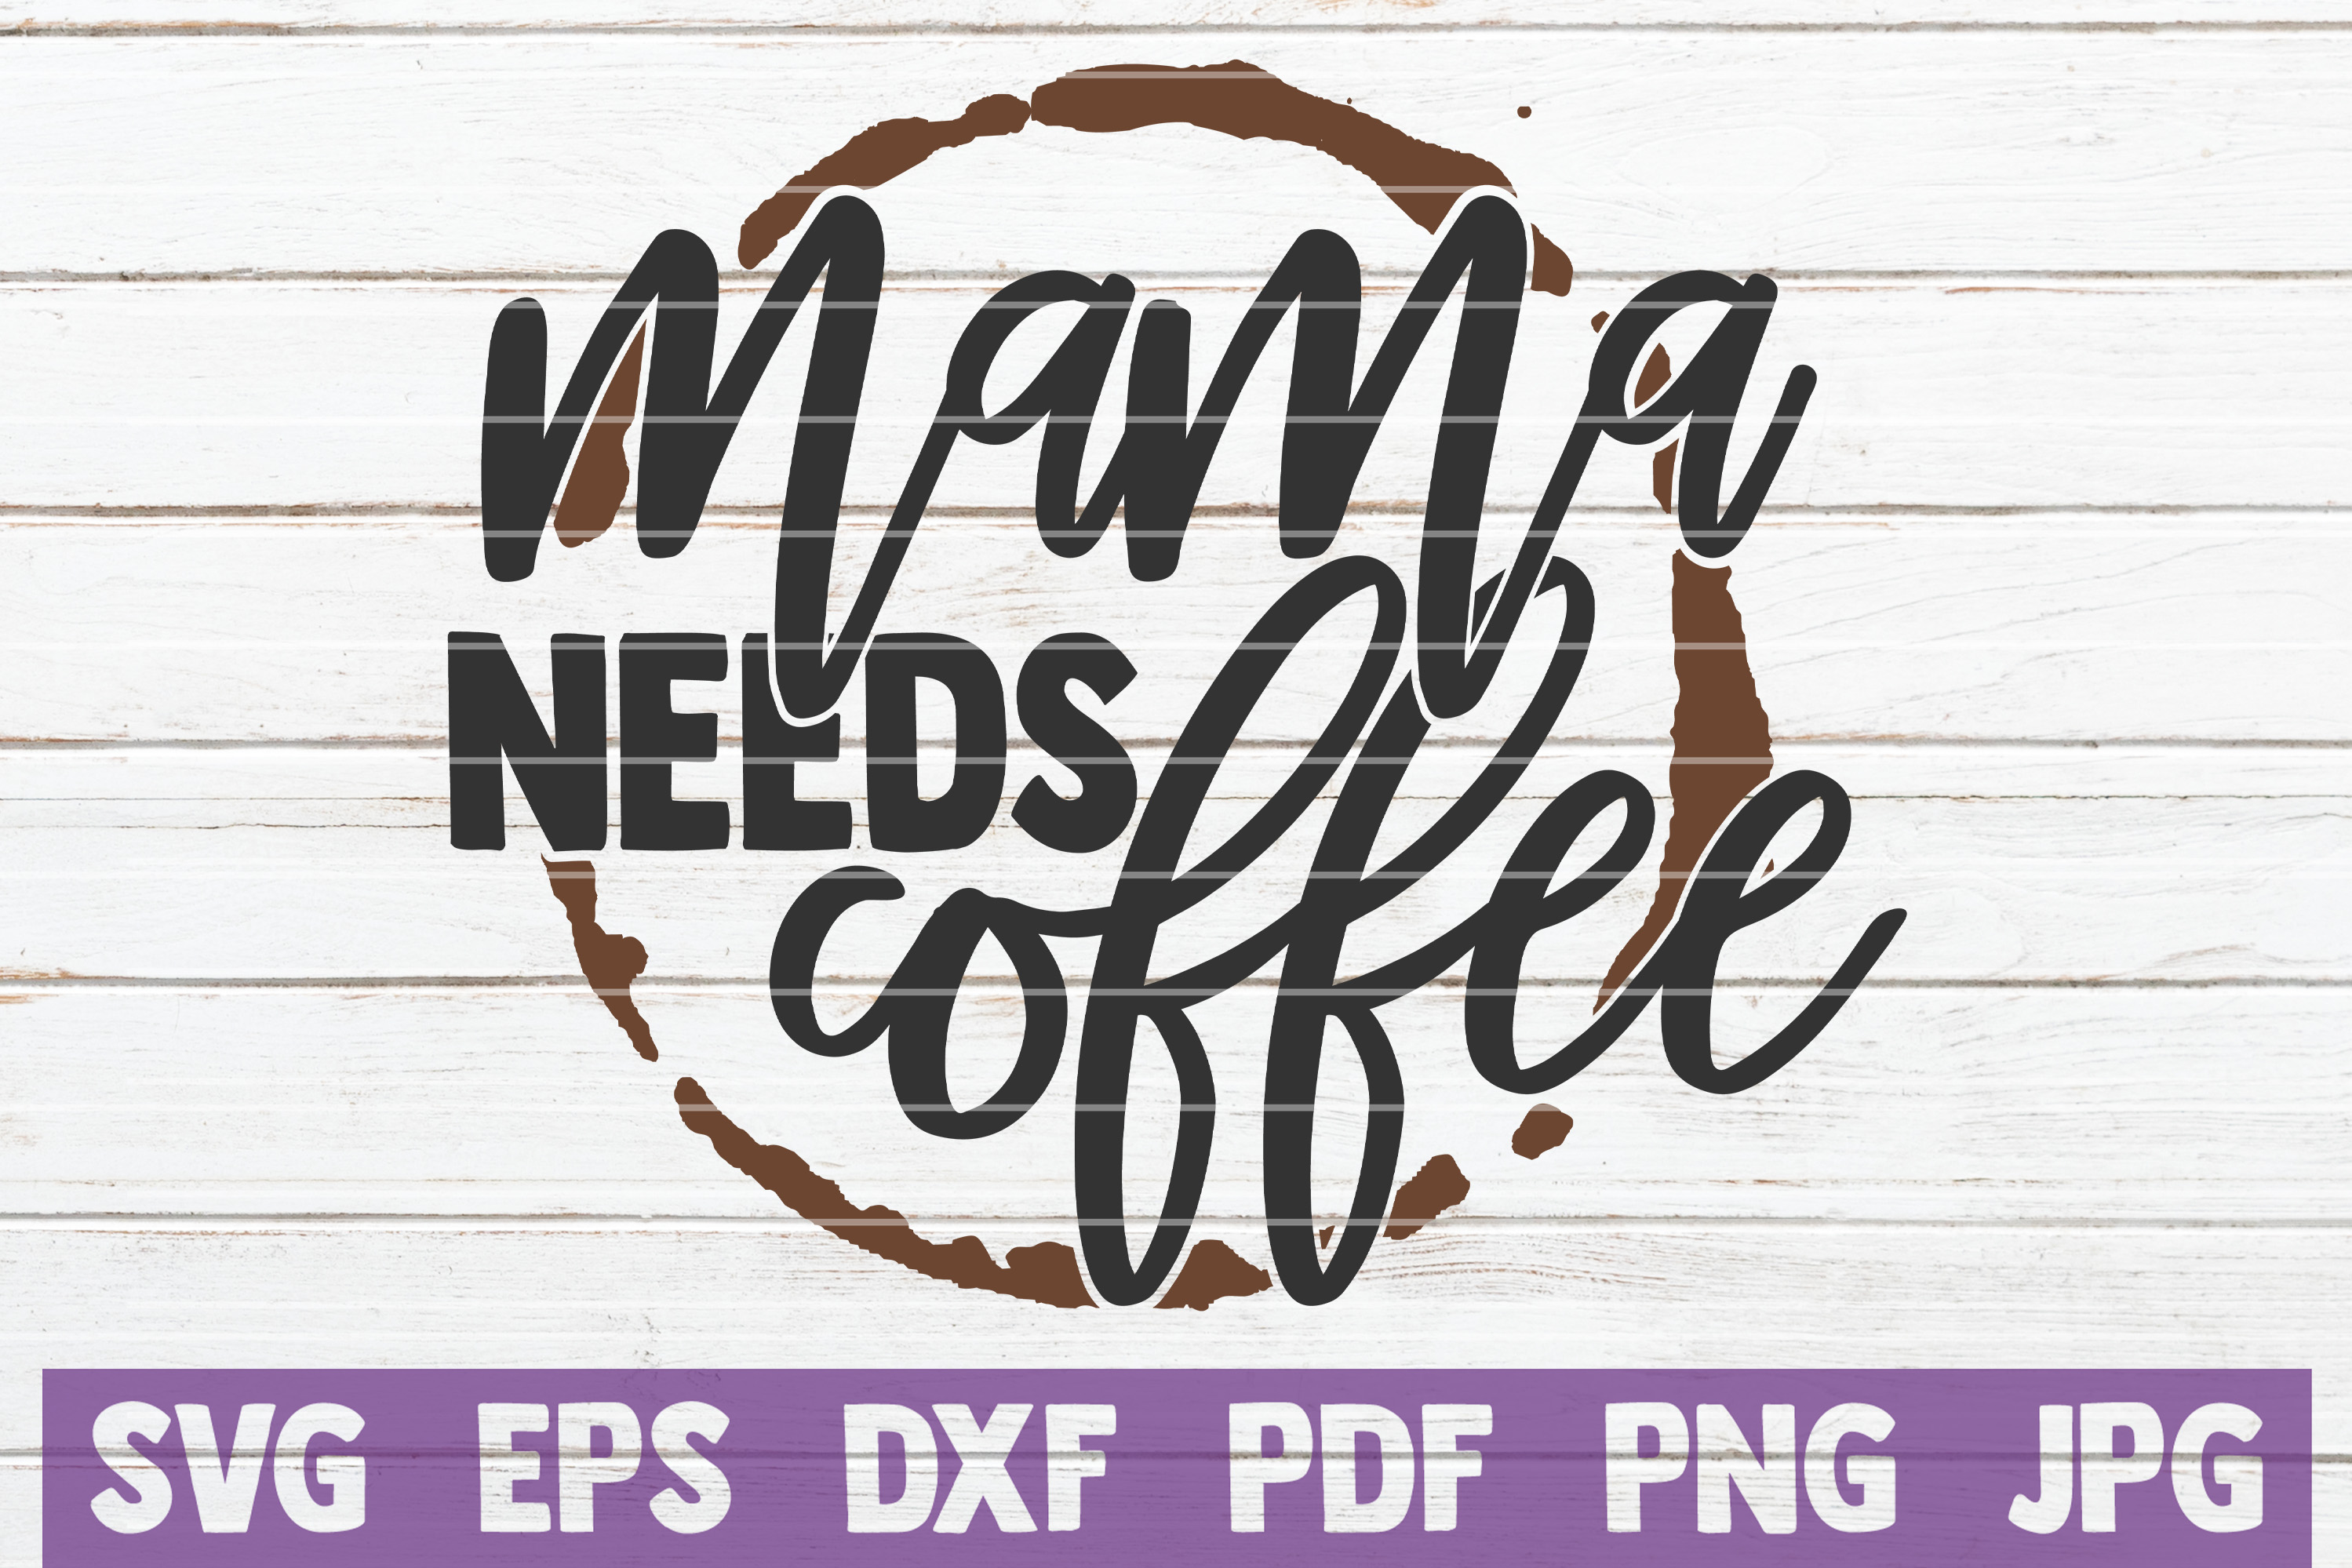 Download Coffee SVG Bundle | SVG Cut files | commercial use